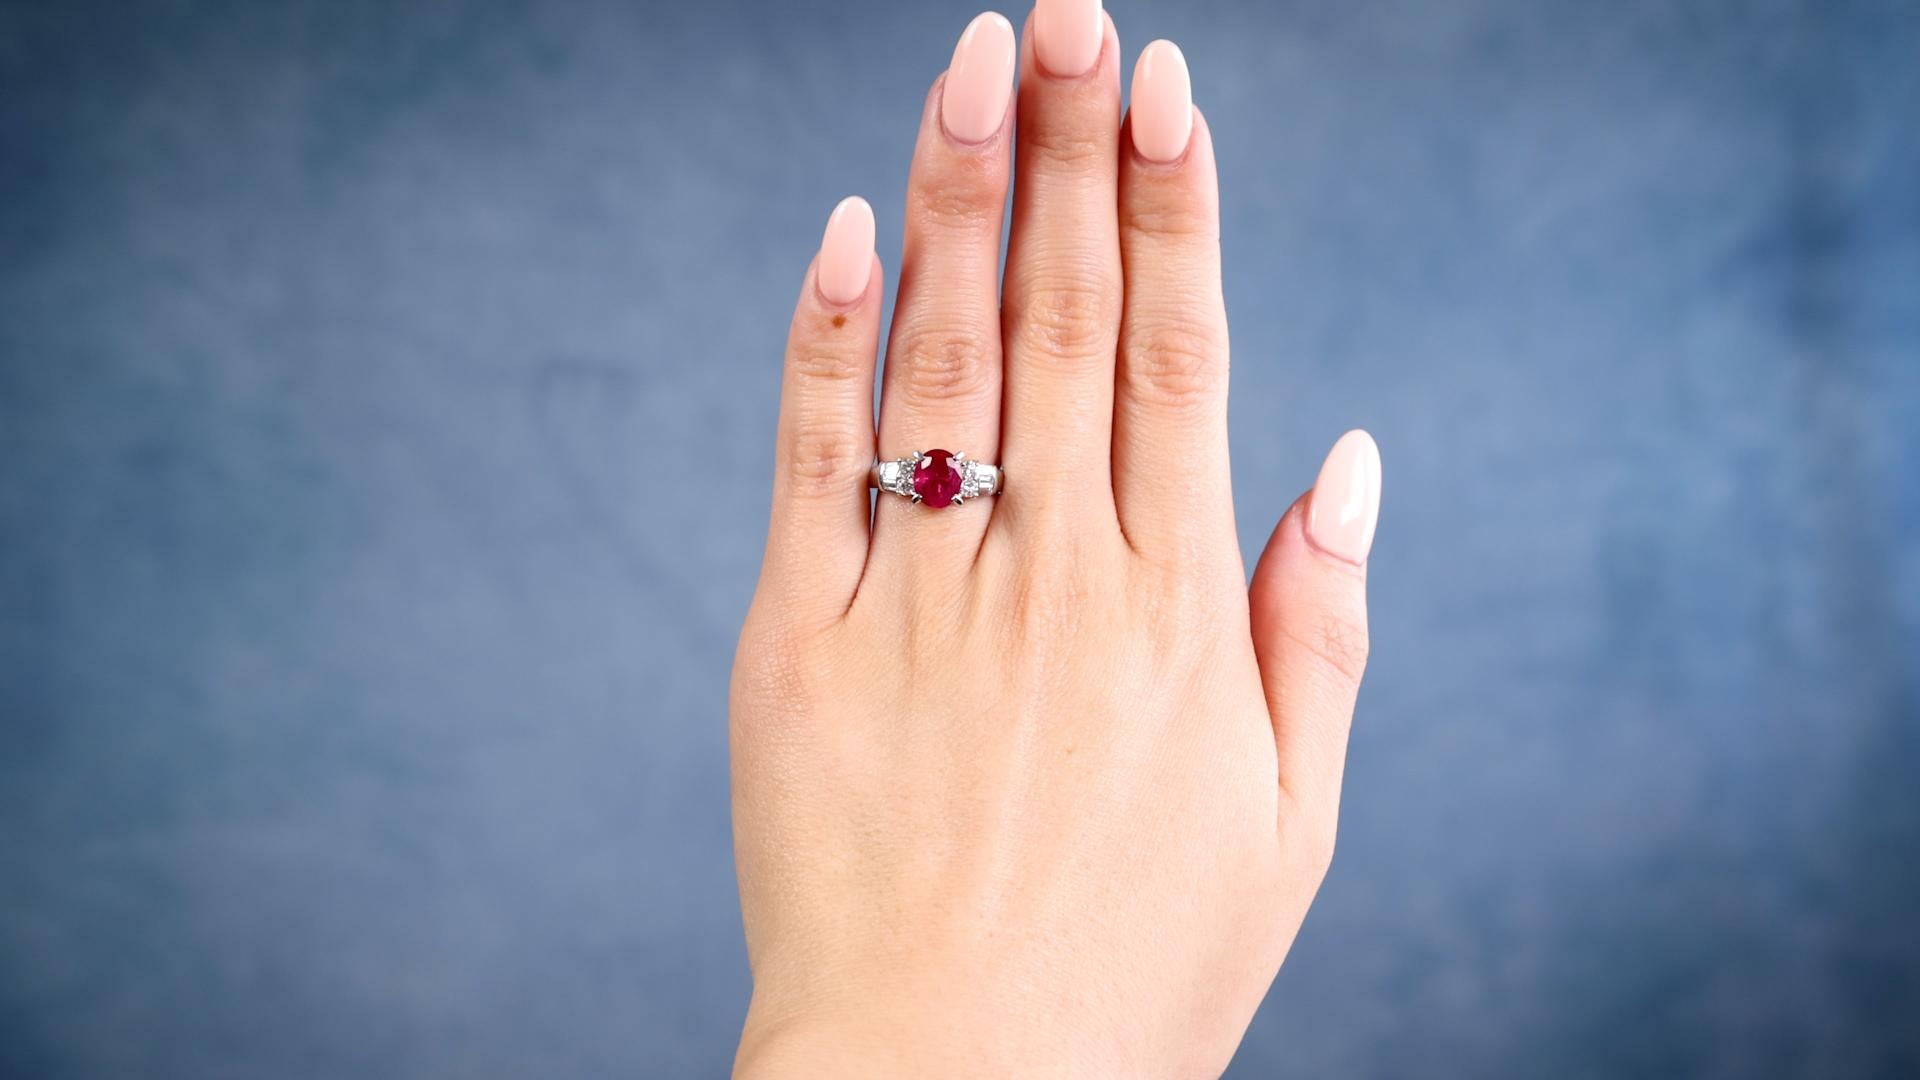 One Vintage 1.54 Carat Ruby Diamond Platinum Ring. Featuring one oval cut ruby of 1.54 carats. Accented by four round brilliant and six tapered baguette cut diamonds with a total weight of 0.38 carat, graded F-G color, VS clarity. Crafted in